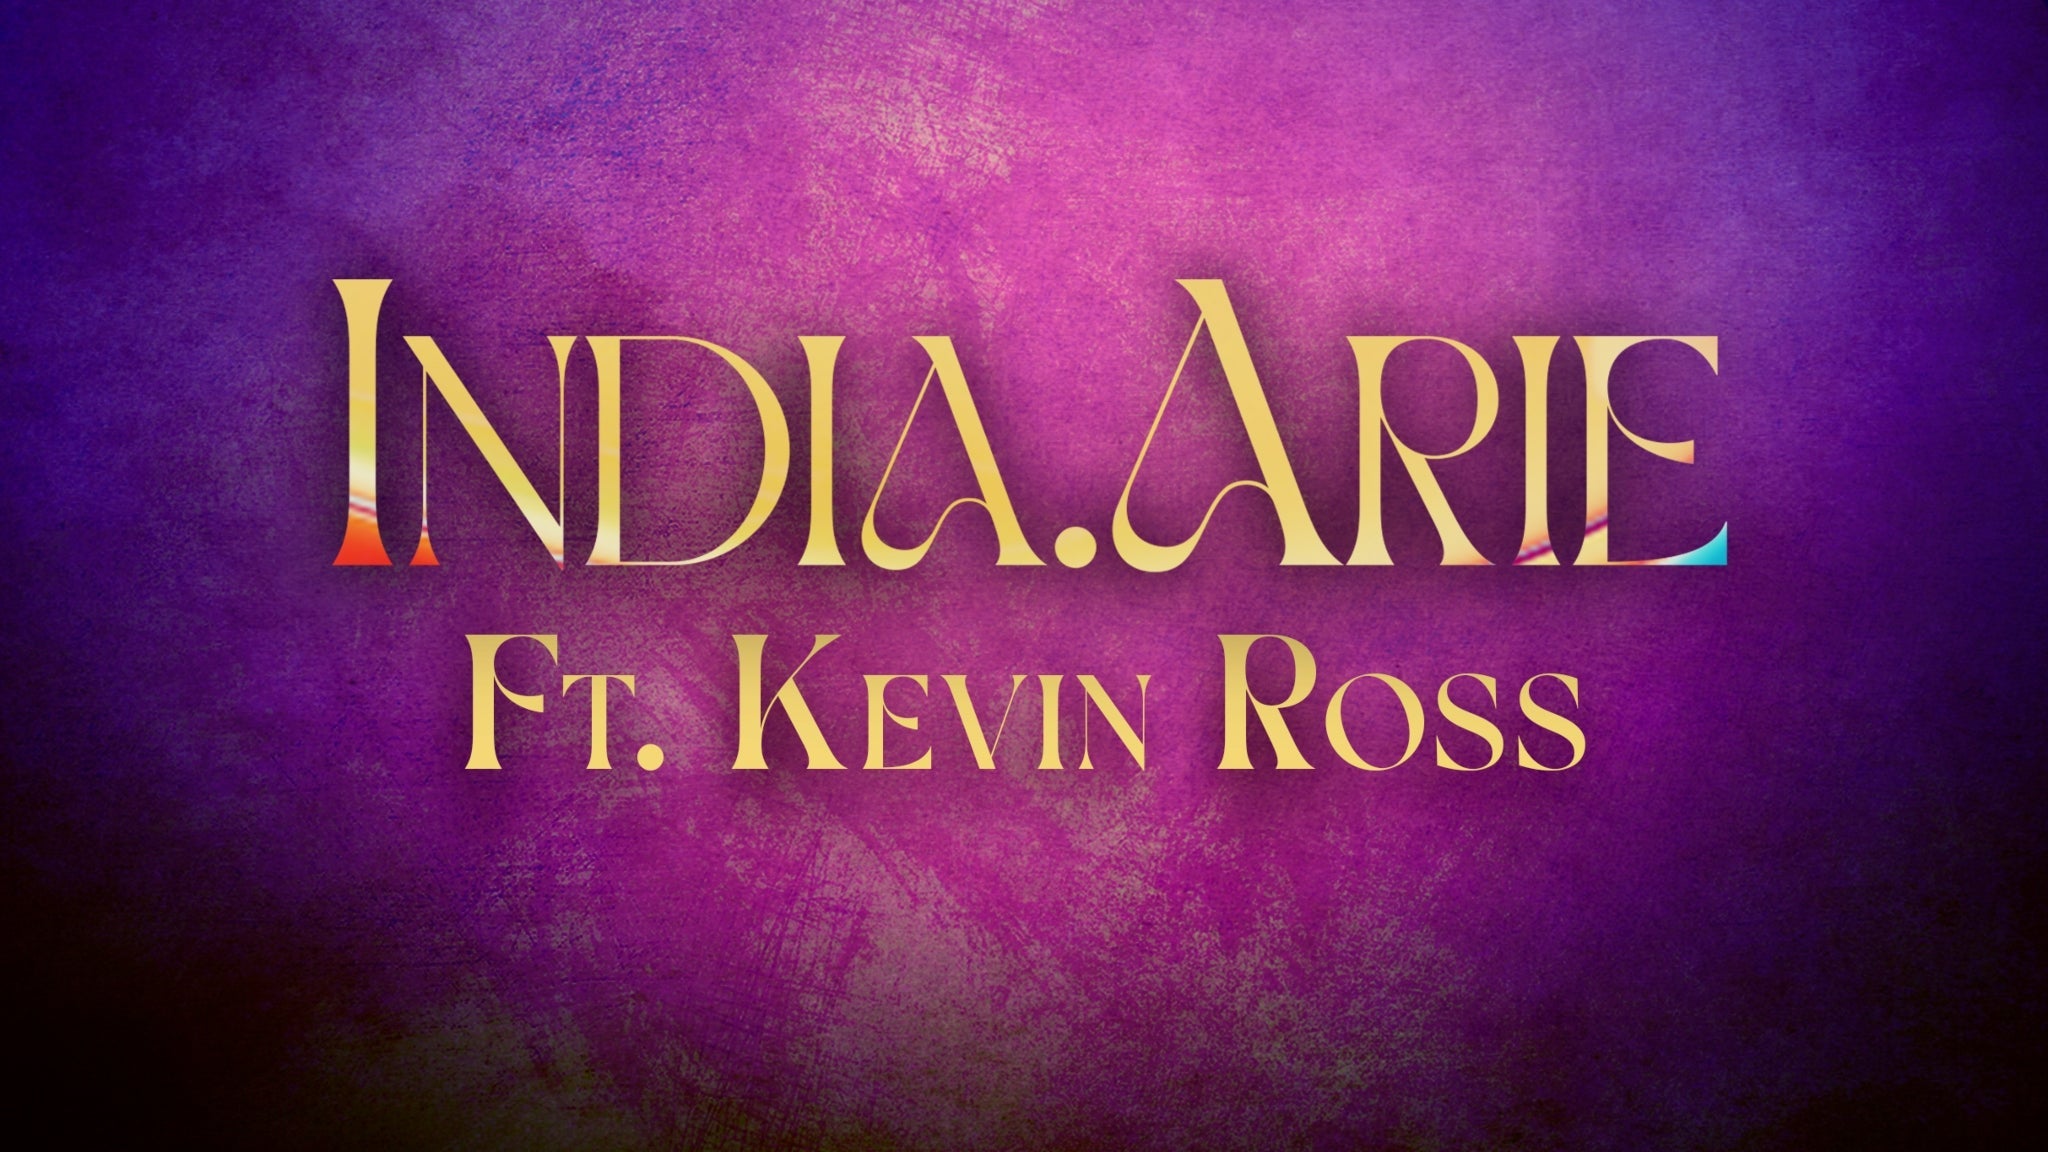 India. Arie's Soul Bird Experience ft. Kevin Ross